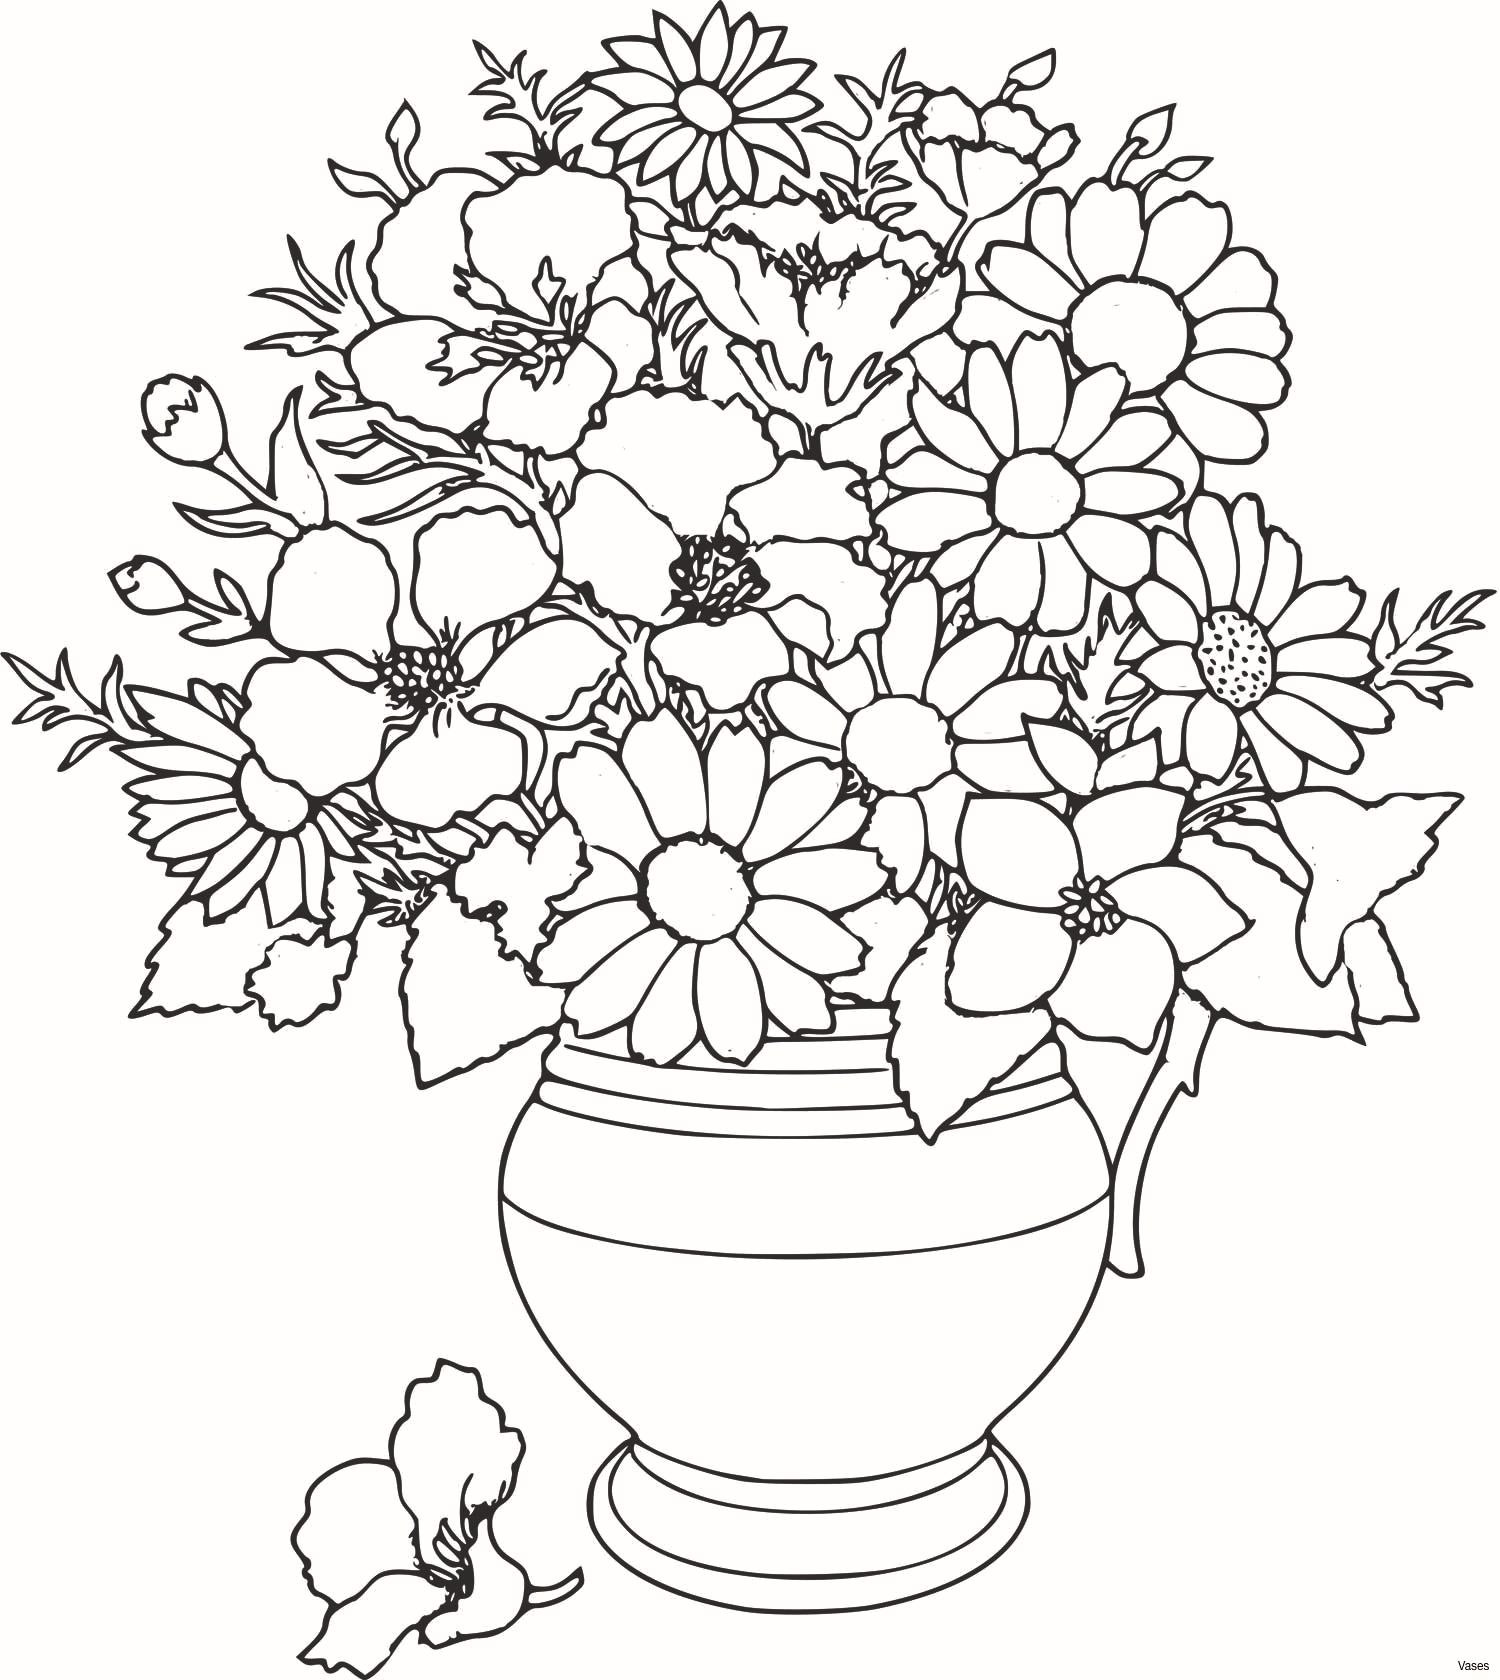 19 Great Picture Frame Vase 2024 free download picture frame vase of flower in a vase beautiful flowers coloring pages luxury cool vases with flower in a vase beautiful flowers coloring pages luxury cool vases flower vase coloring page